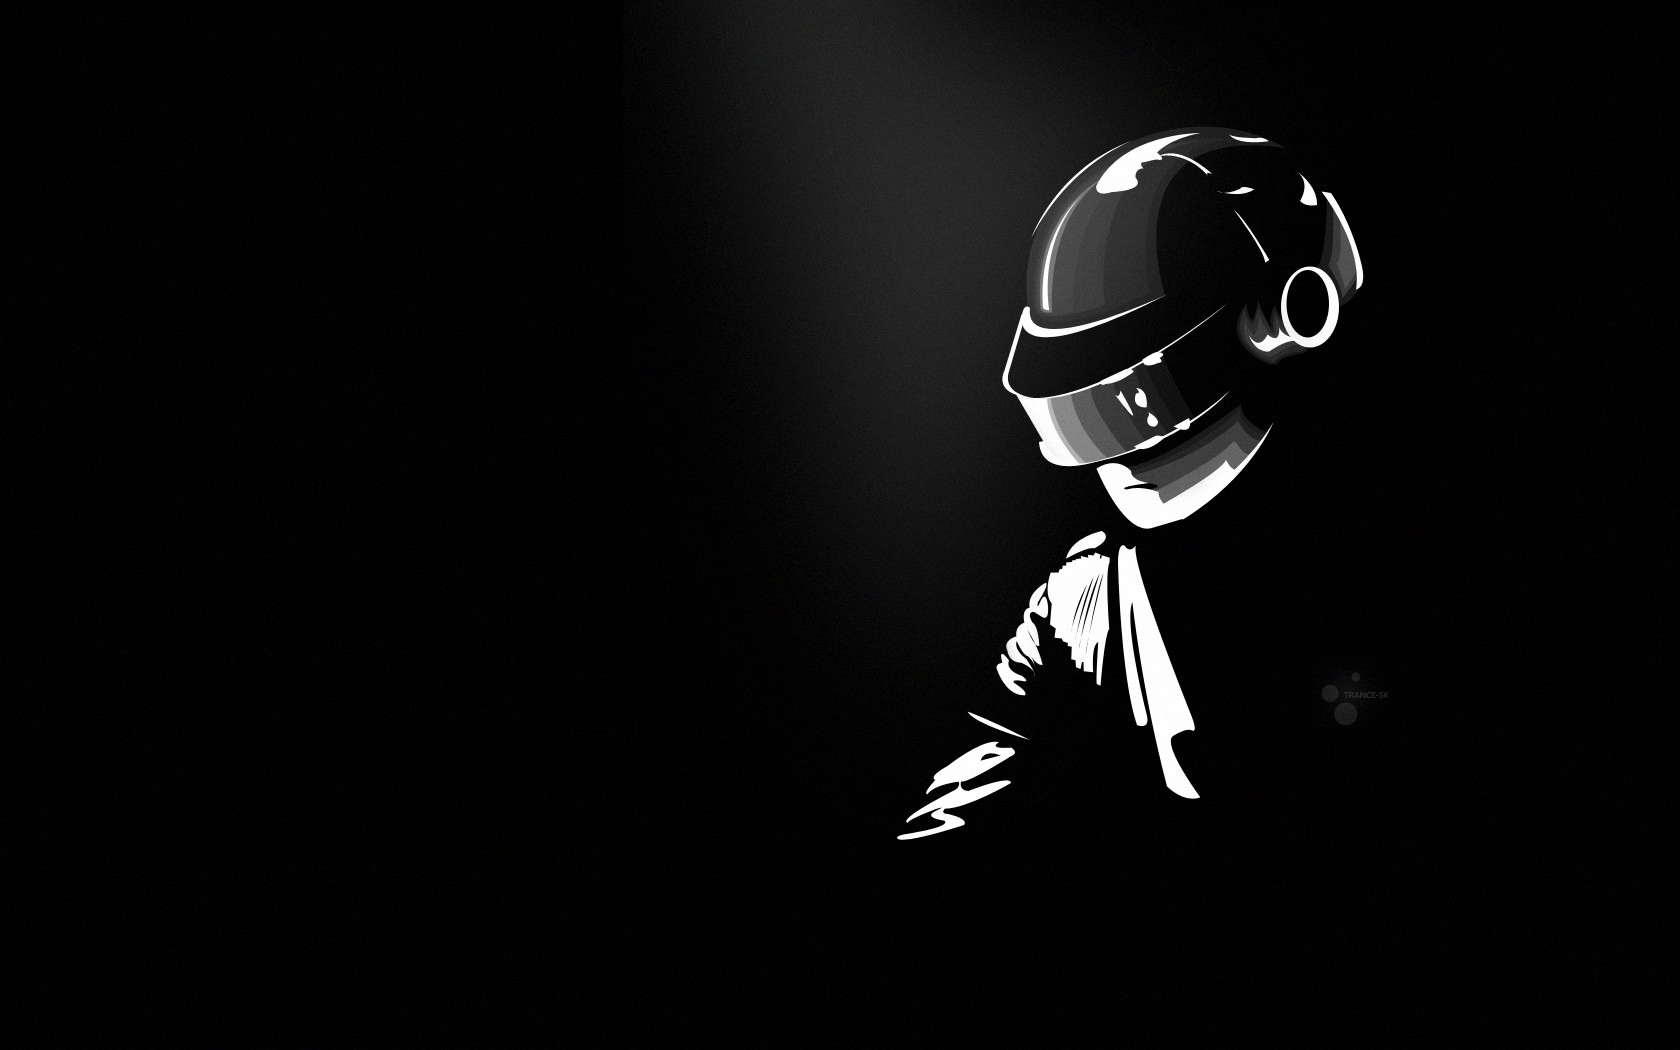 Image For > Daft Punk Iphone Backgrounds